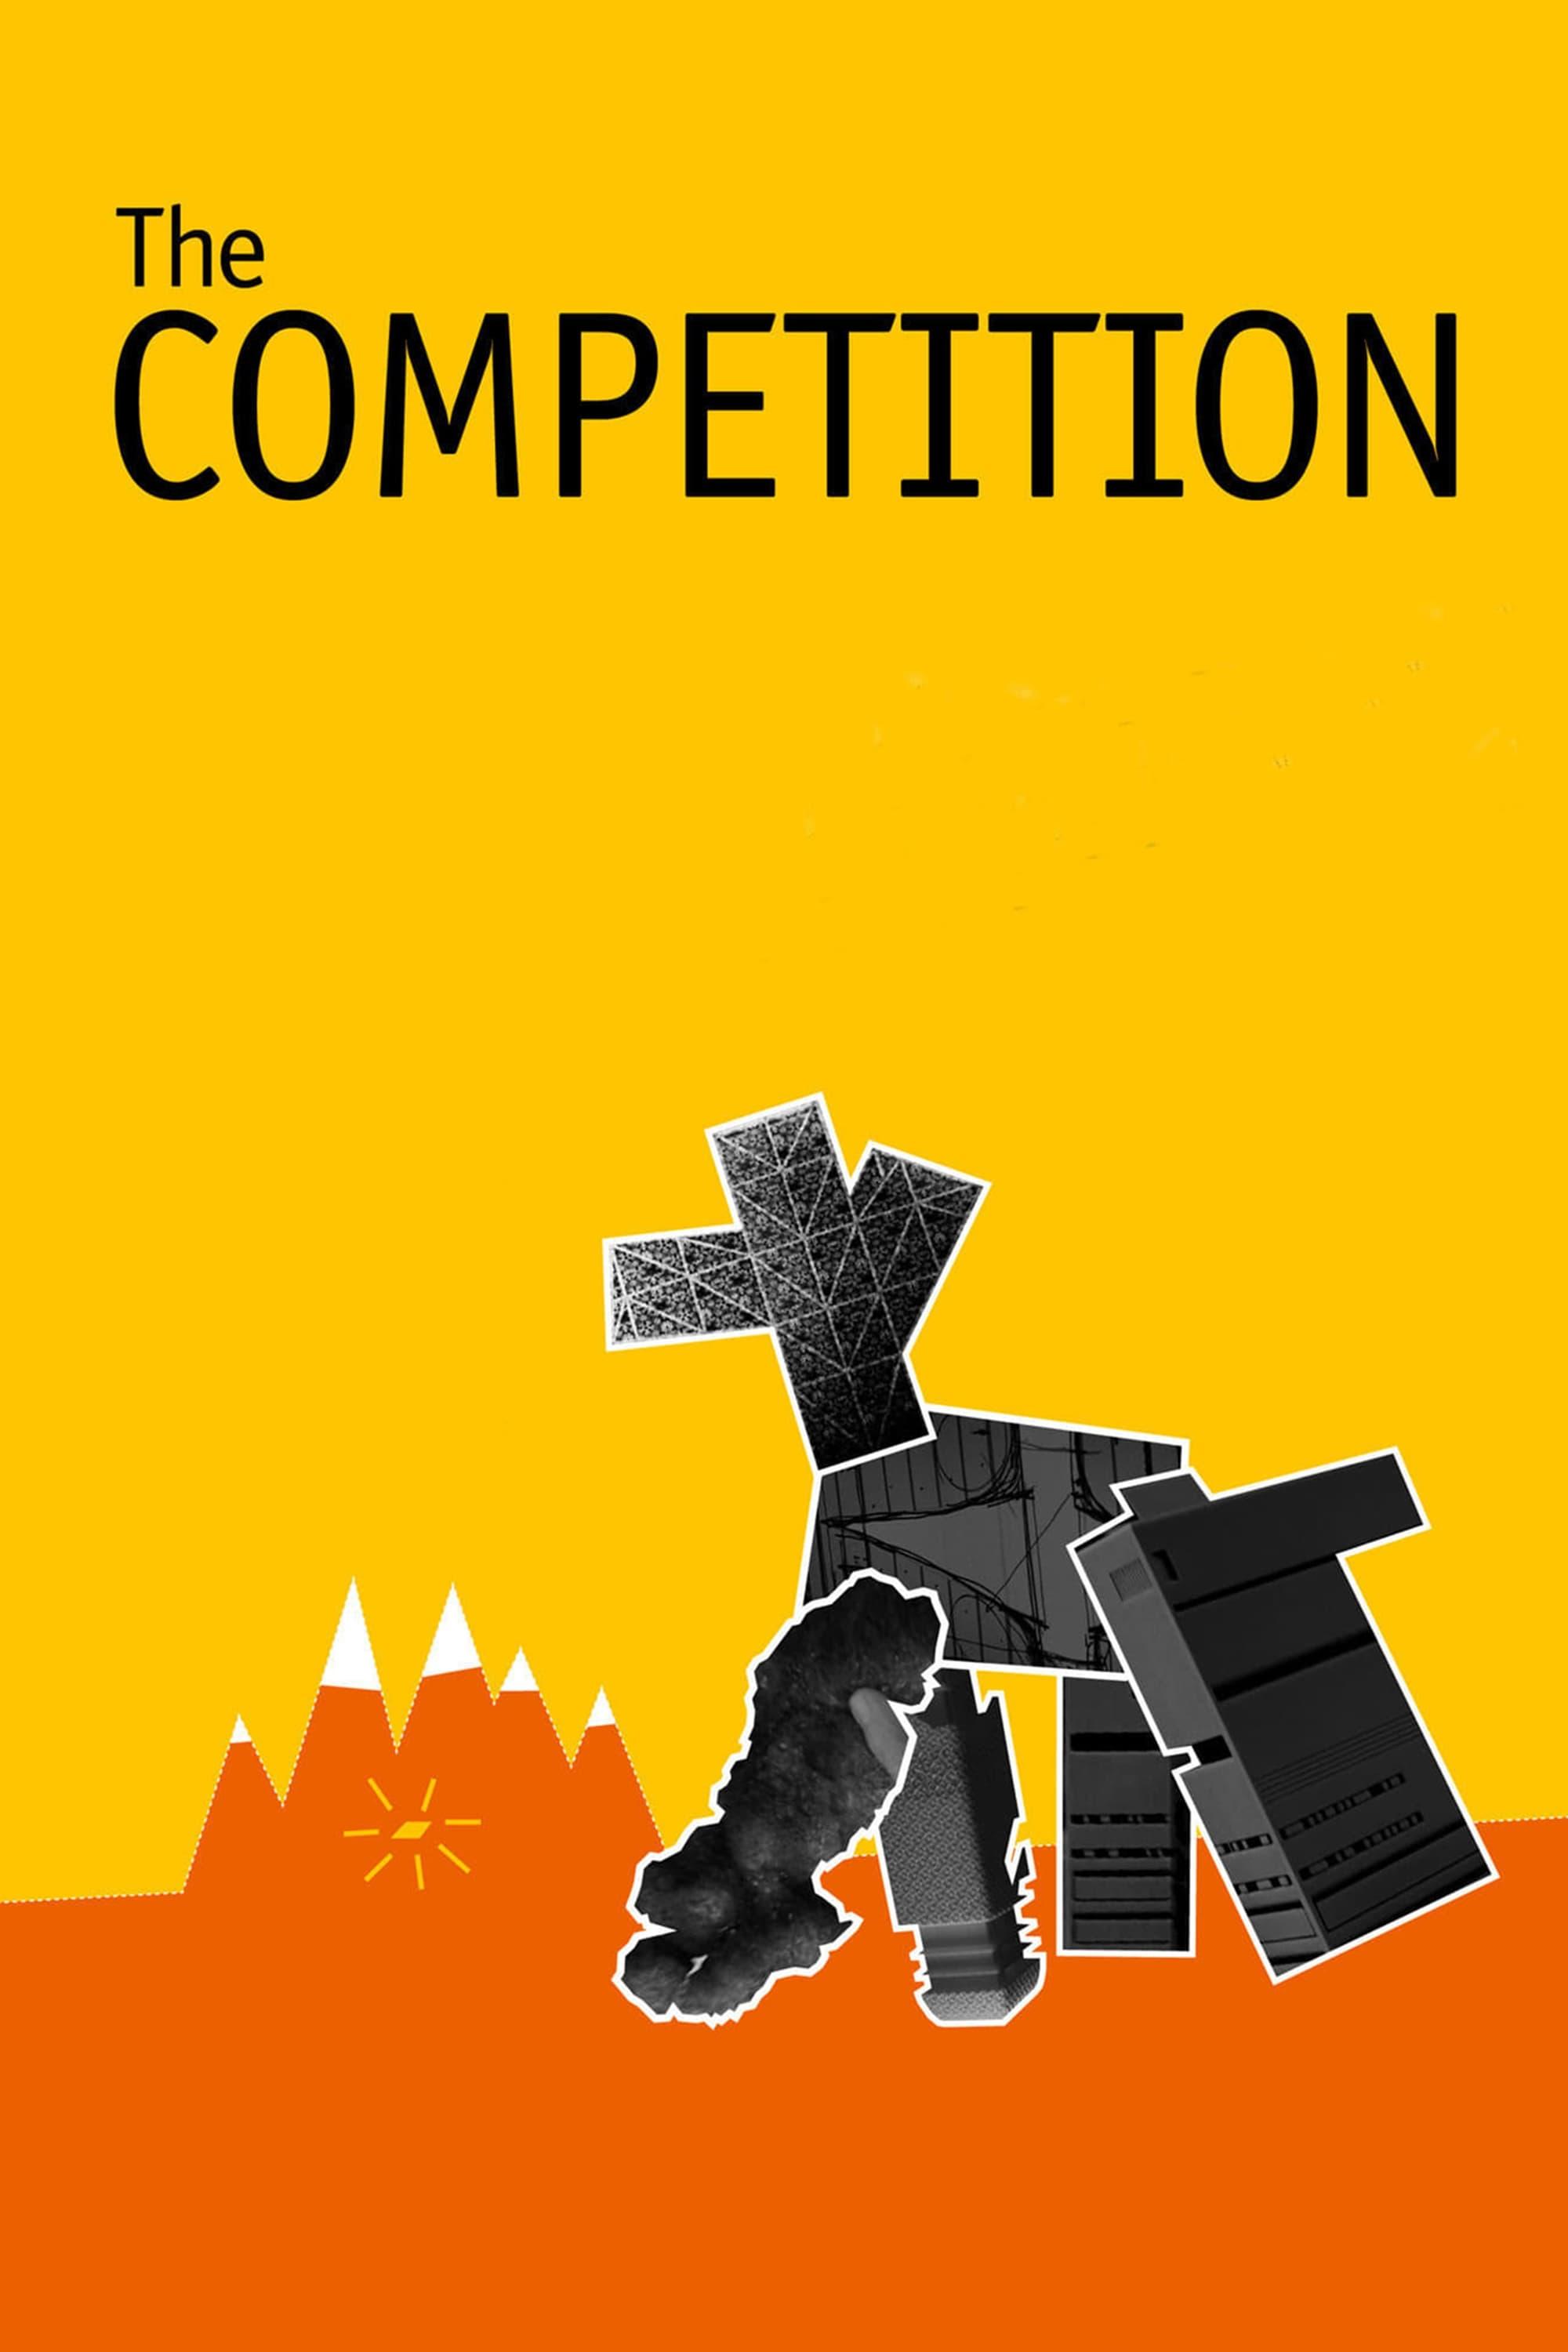 The Competition poster